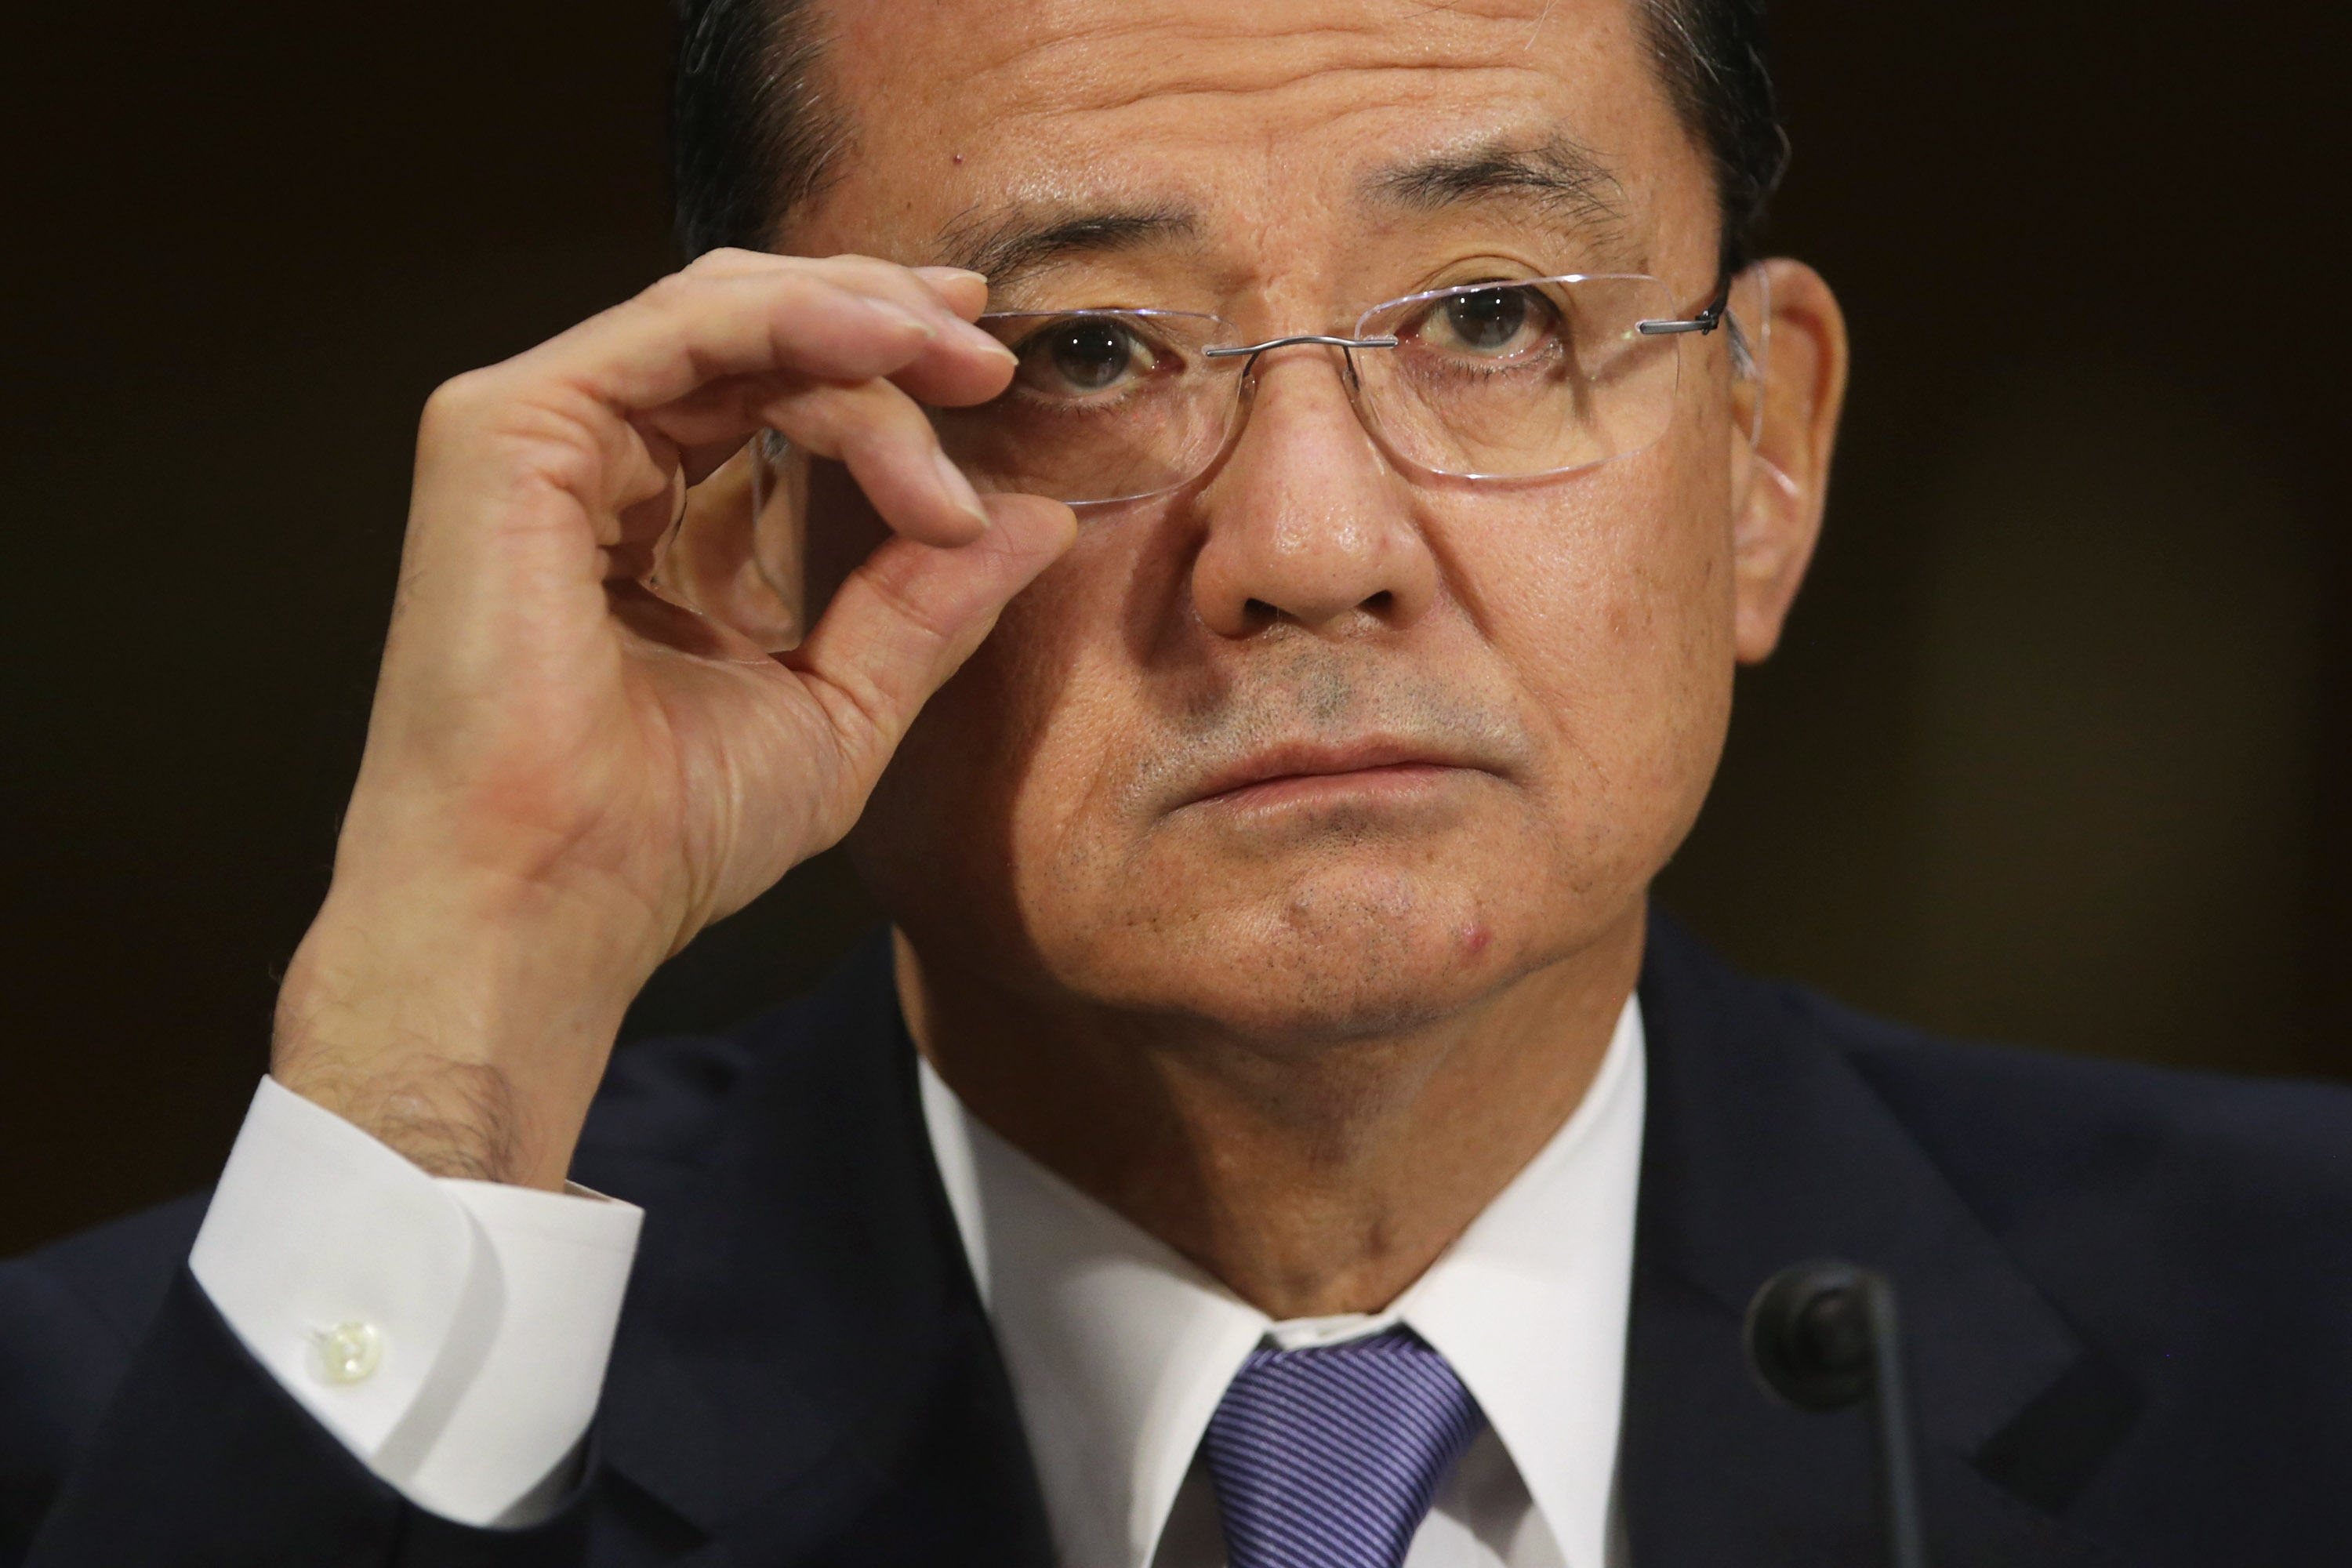 U.S. Veterans Affairs Secretary Eric Shinseki testifies before the Senate Veterans' Affairs Committee about wait times veterans face  to get medical care May 15, 2014 in Washington, DC. (Chip Somodevilla—Getty Images)